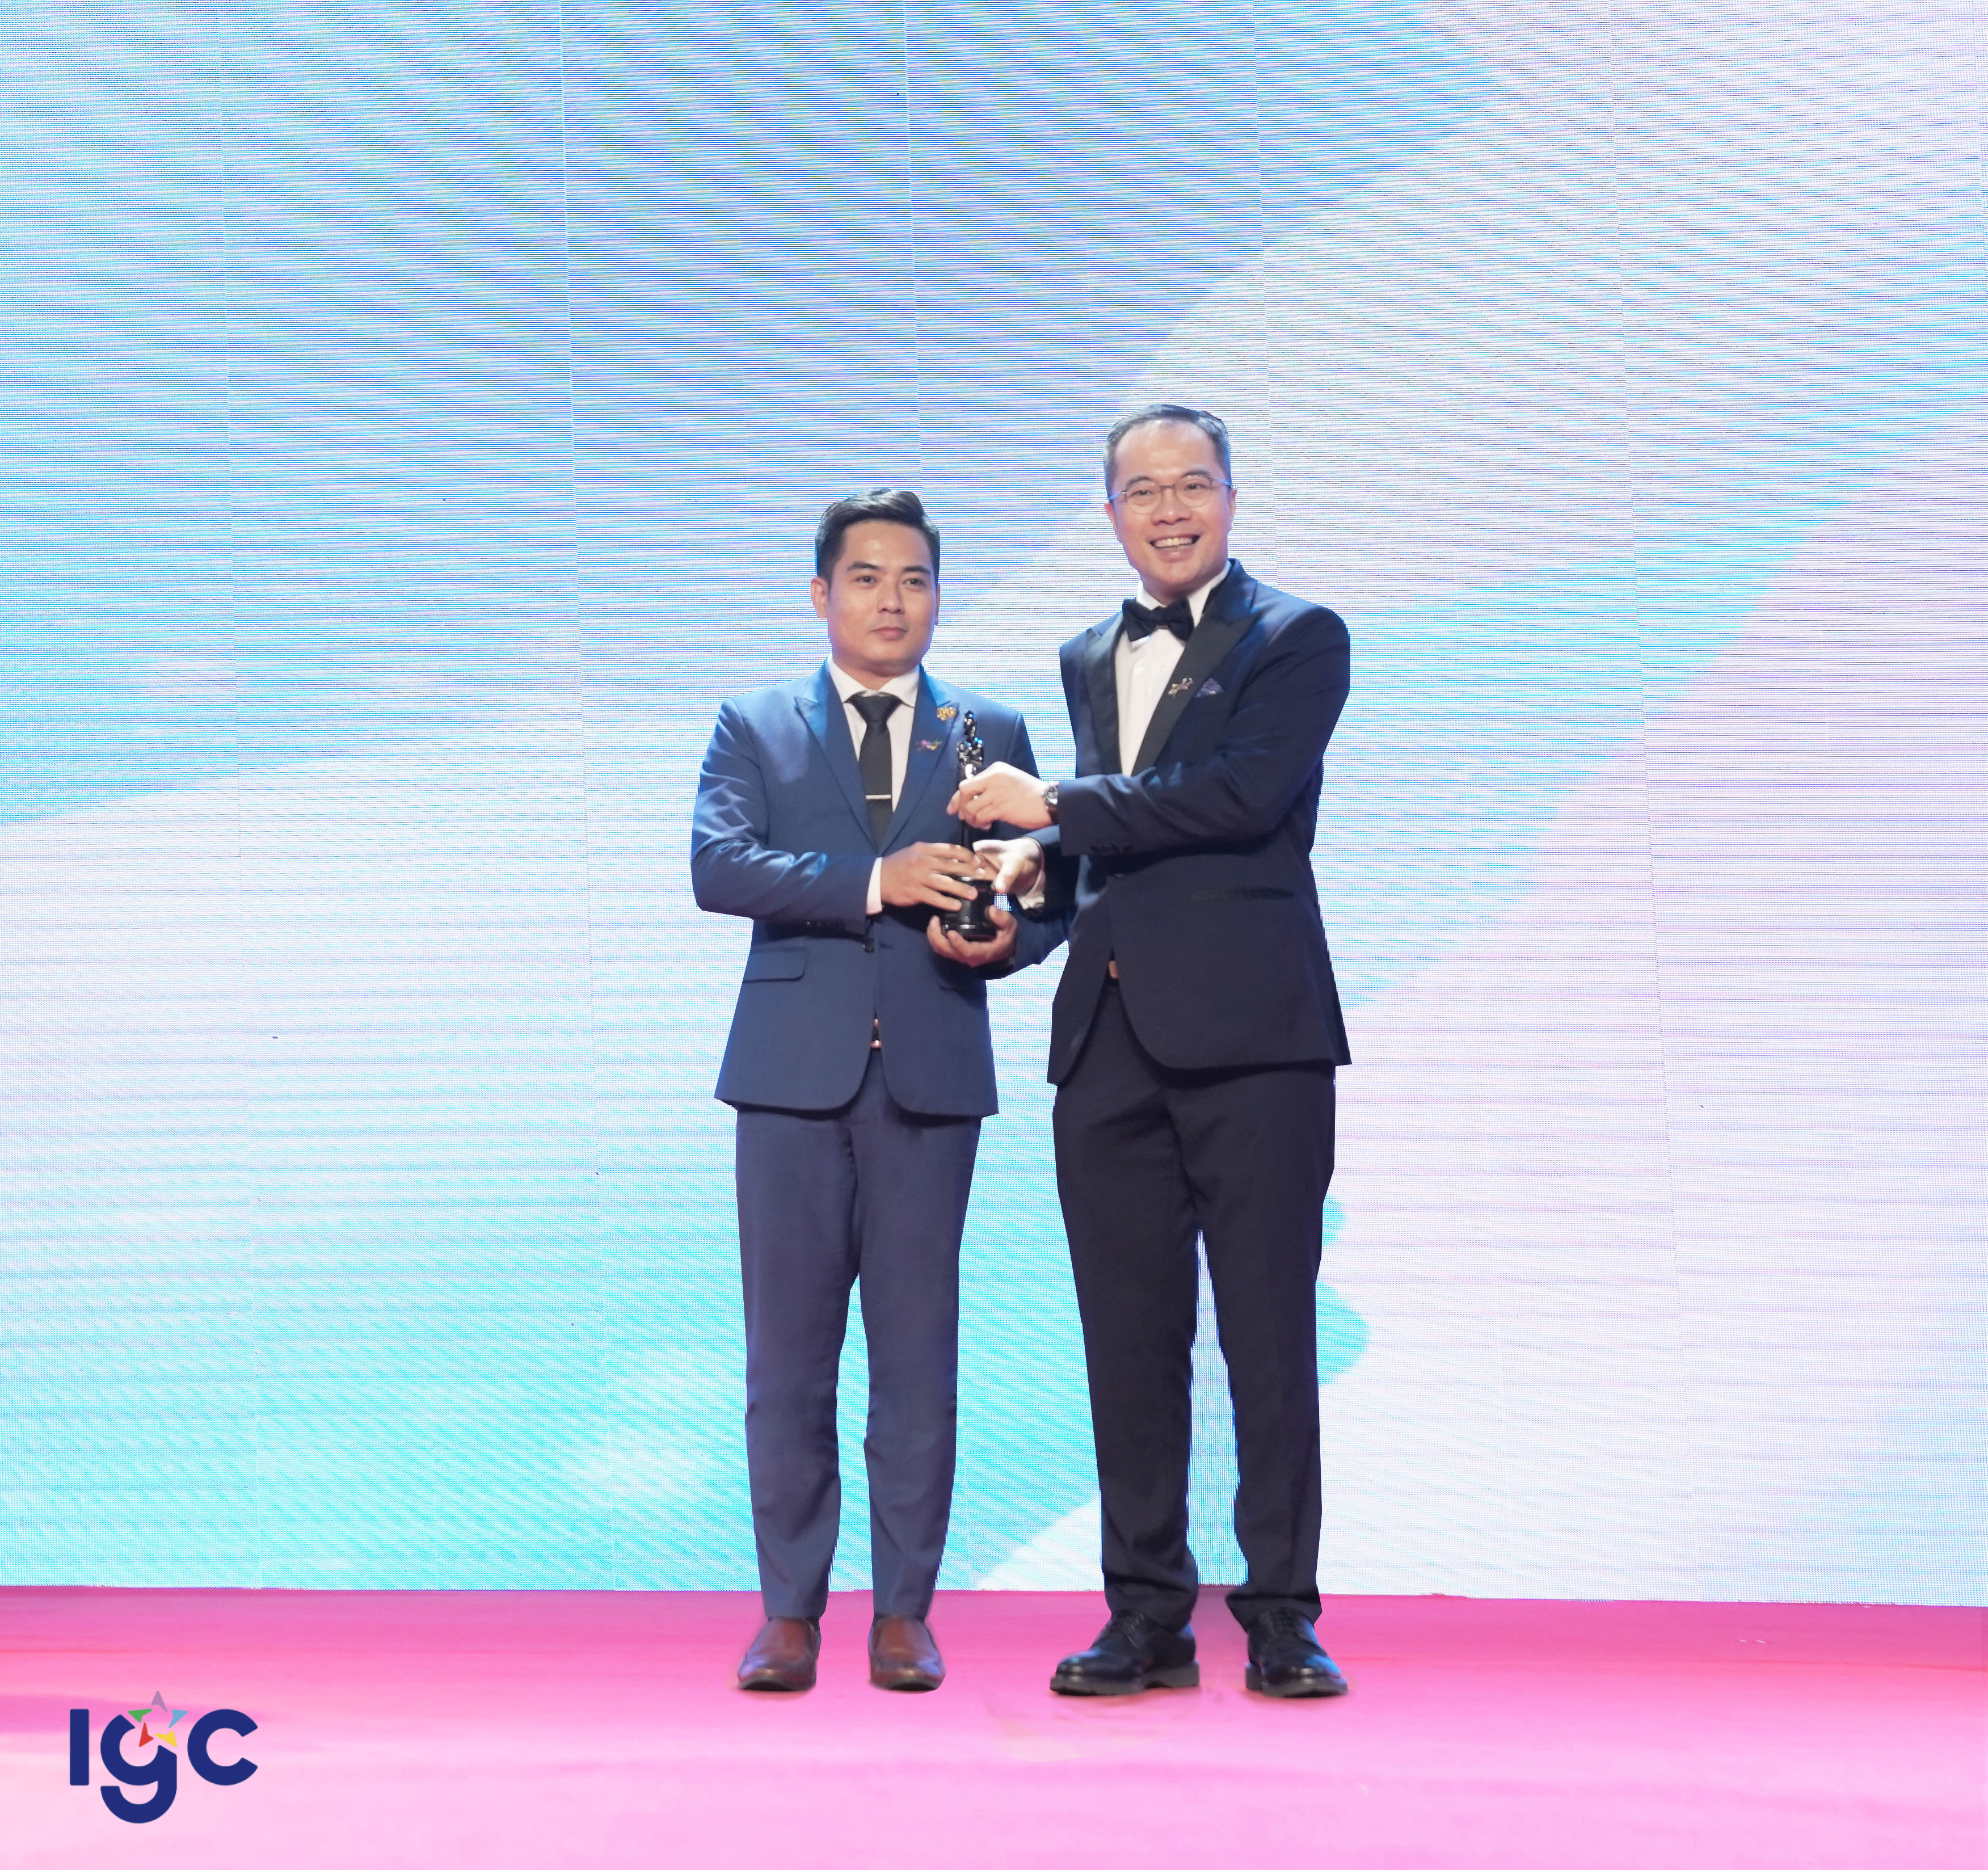 Congratulations to IGC Group on winning the "Best Companies to Work for in Asia 2022” award